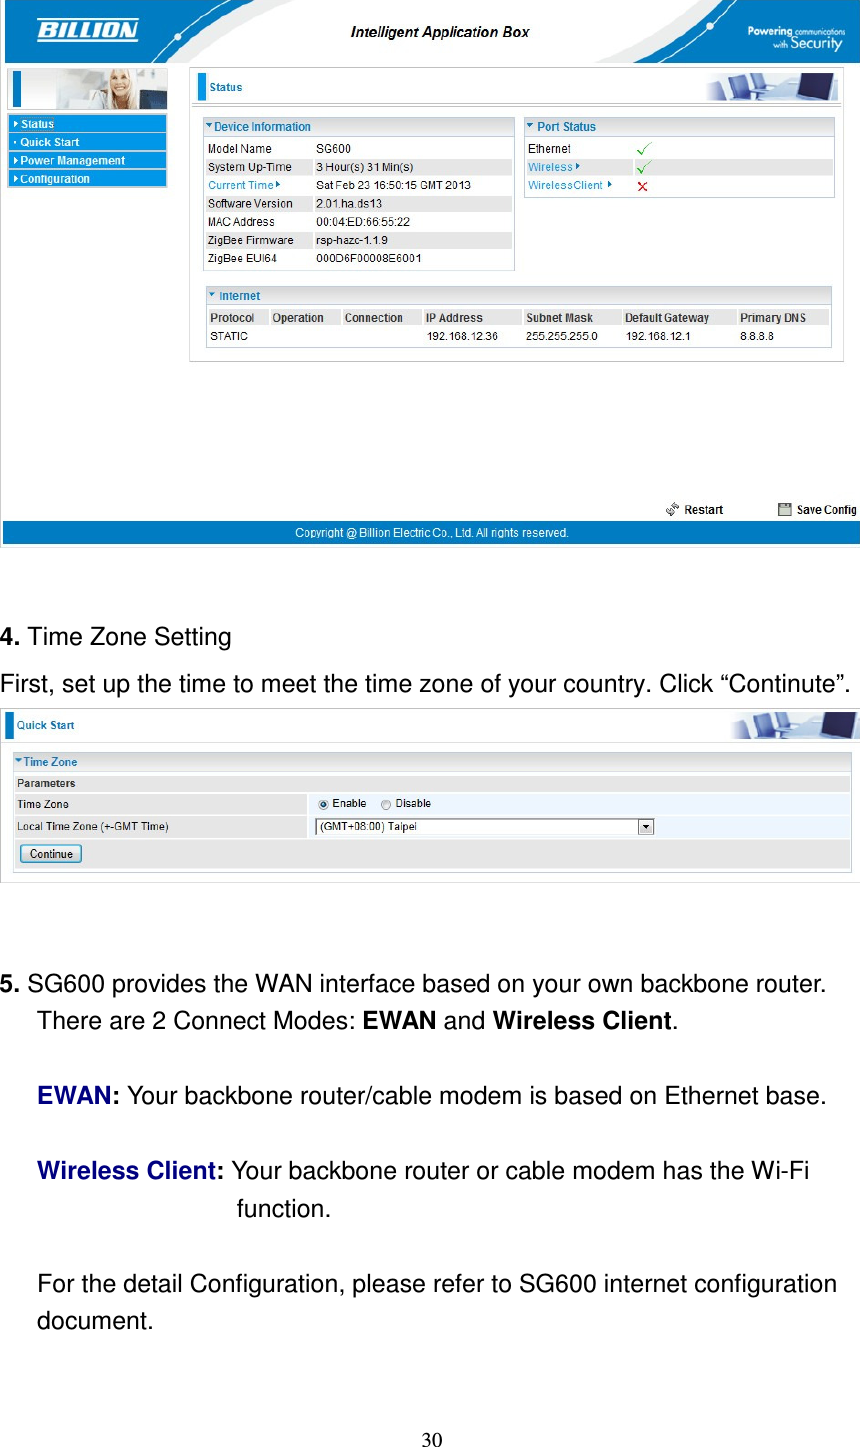   30   4. Time Zone Setting   First, set up the time to meet the time zone of your country. Click “Continute”.    5. SG600 provides the WAN interface based on your own backbone router.             There are 2 Connect Modes: EWAN and Wireless Client.  EWAN: Your backbone router/cable modem is based on Ethernet base.  Wireless Client: Your backbone router or cable modem has the Wi-Fi function.    For the detail Configuration, please refer to SG600 internet configuration       document.   